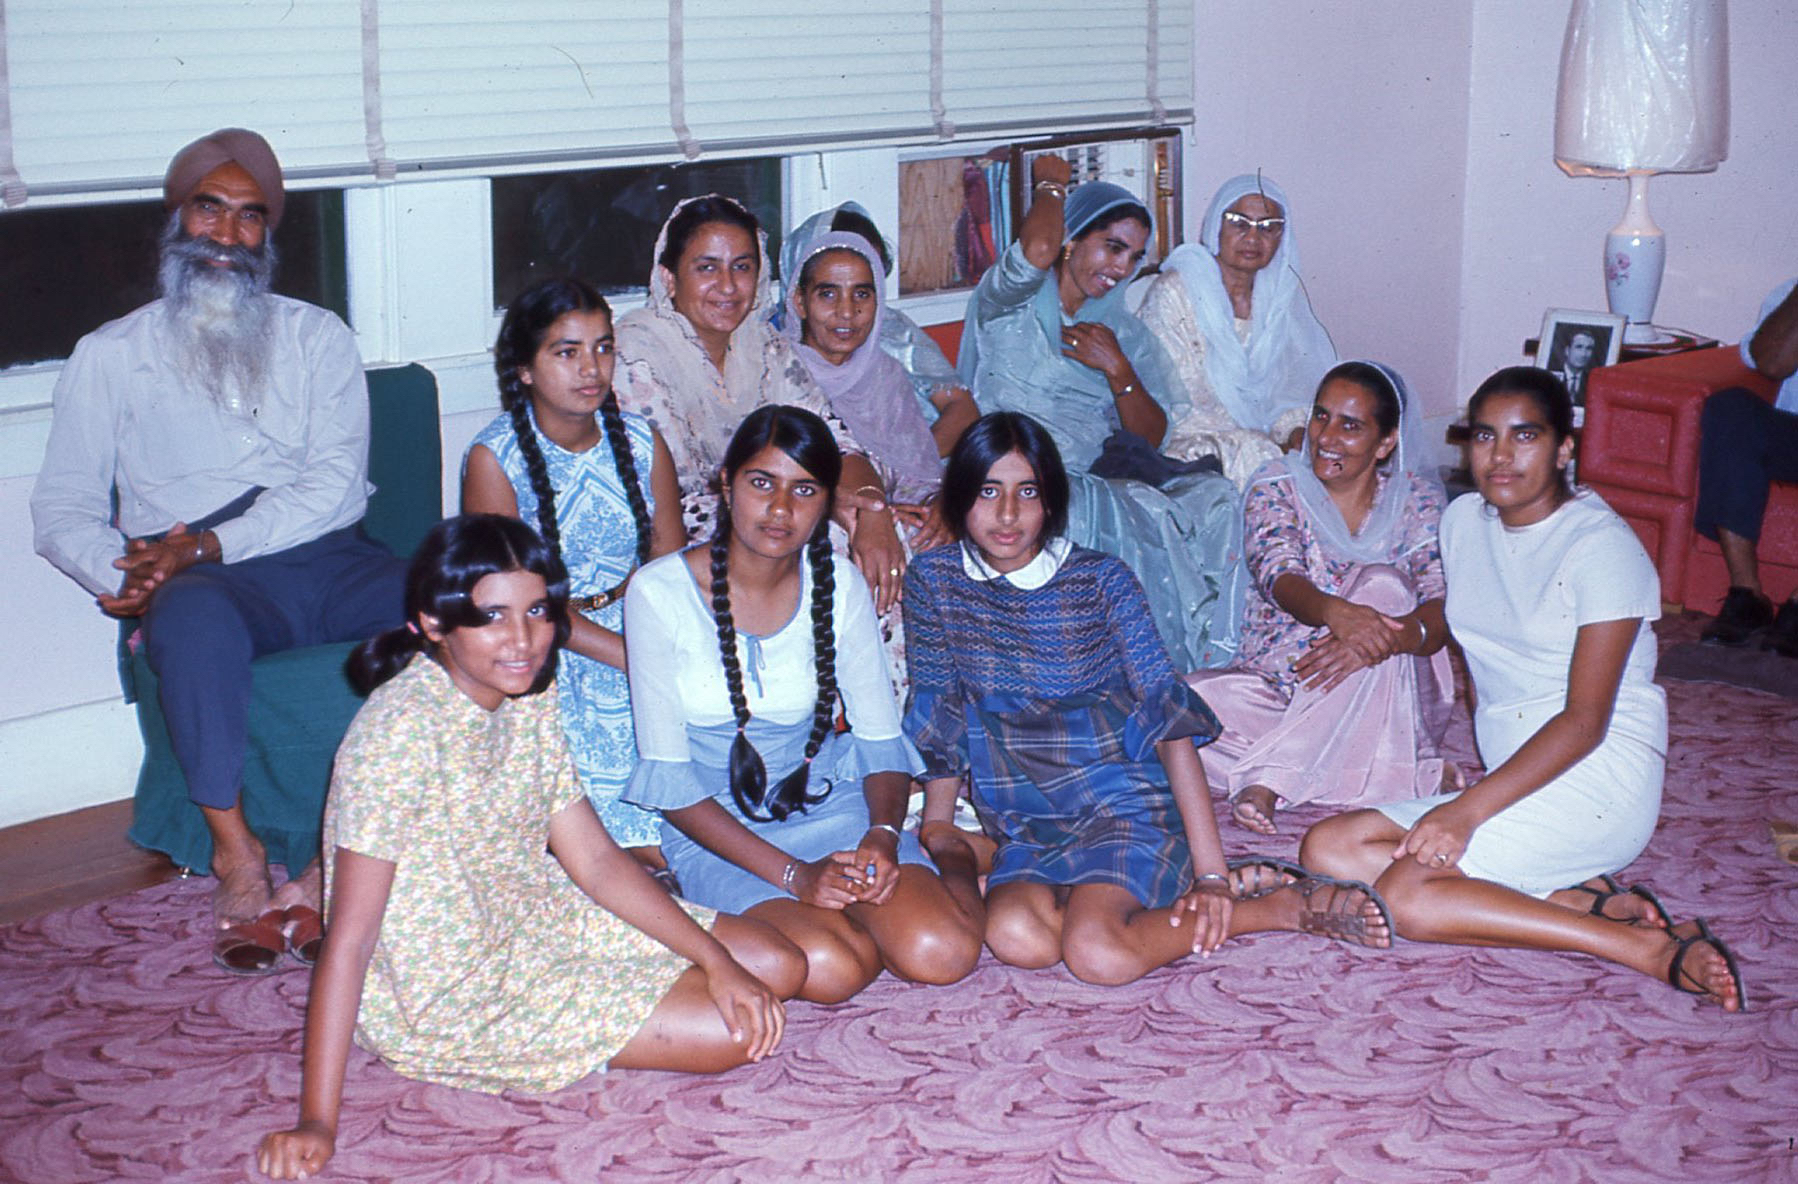 Extended Punjabi family at home in Yuba City, 1967